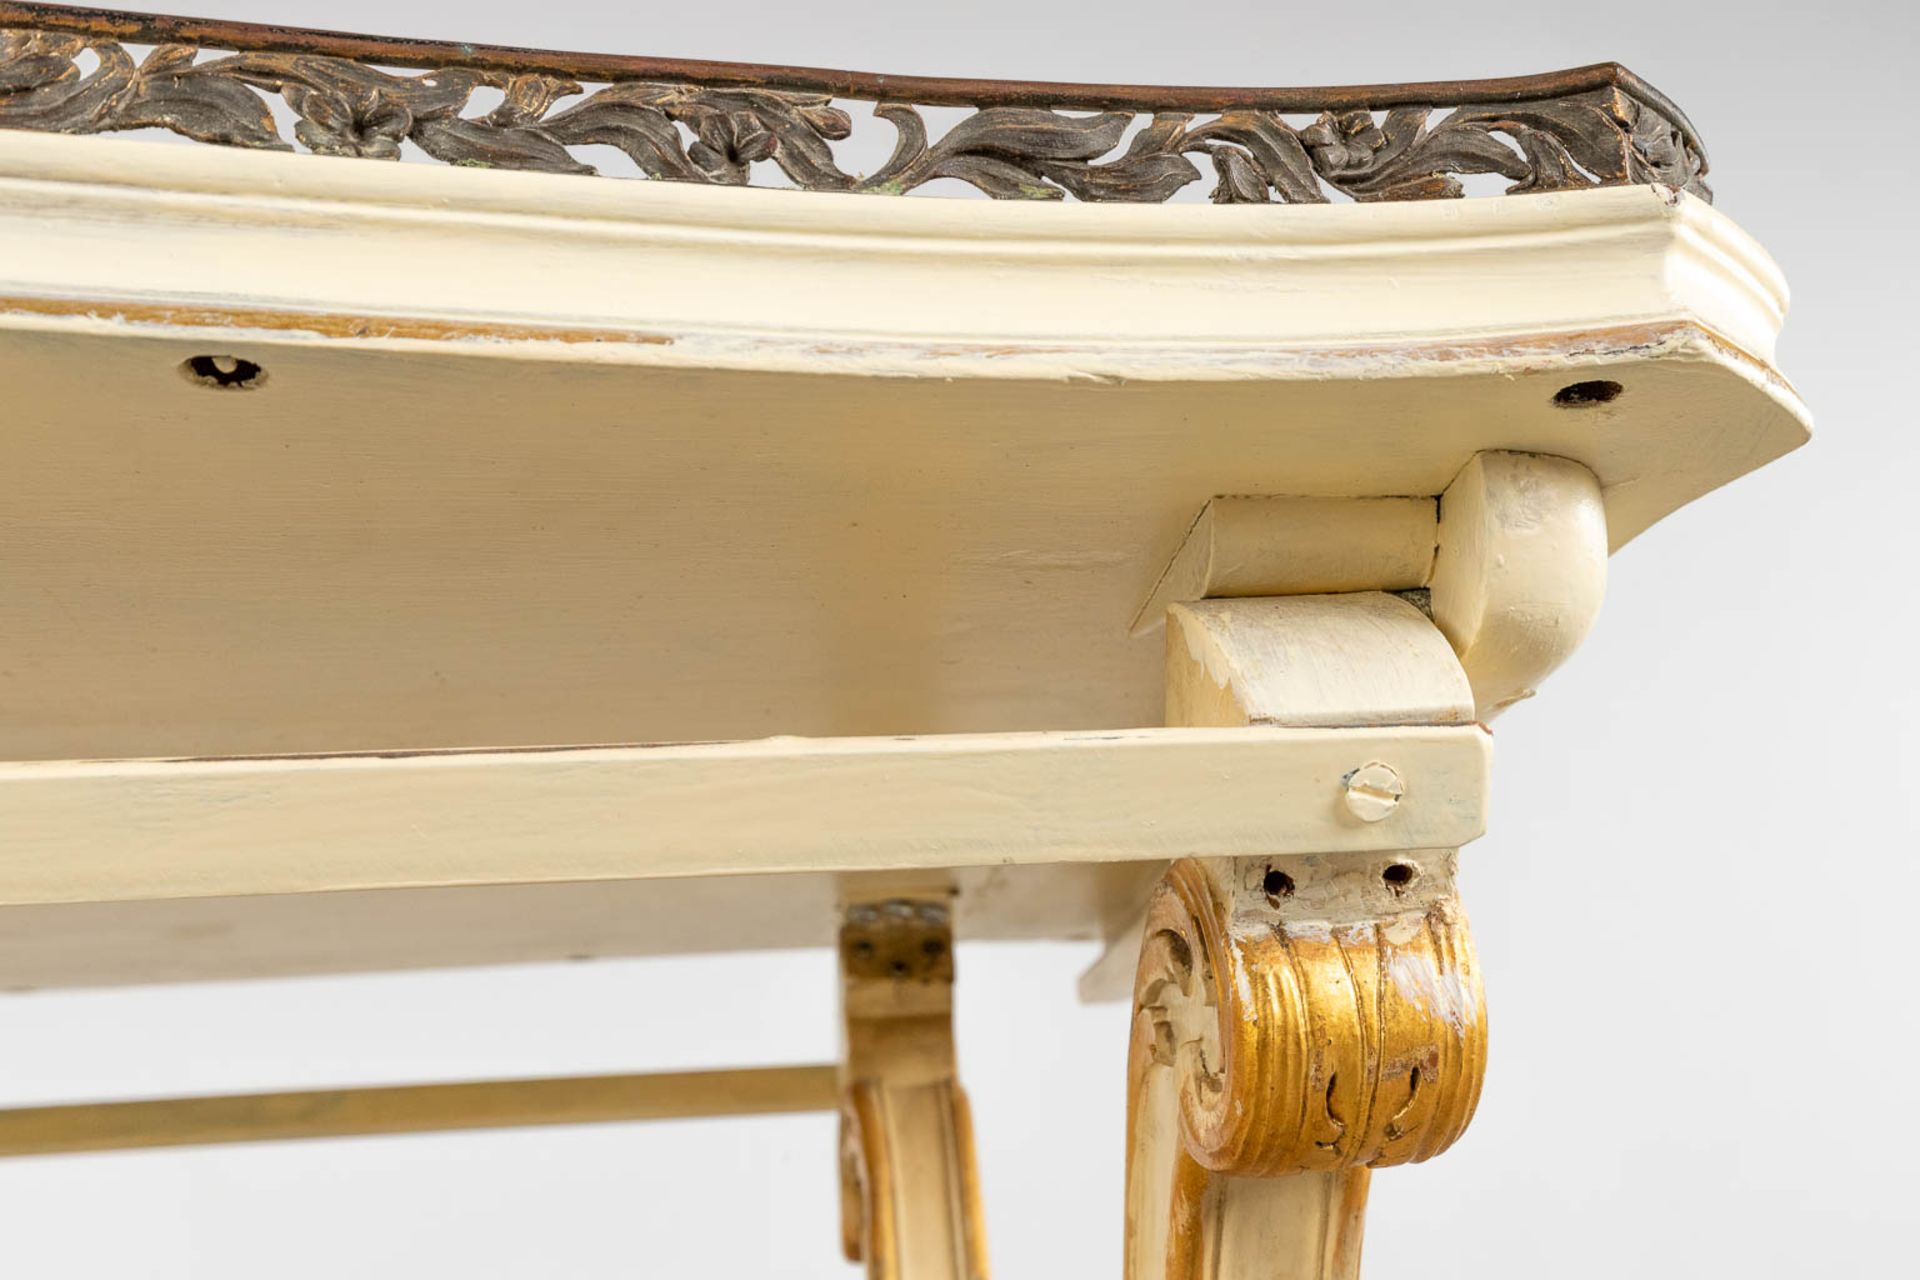 A serving table with bronze gallery, Italian style wood-sculptures. 19th C. (L:60 x W:89 x H:79 cm) - Bild 14 aus 14